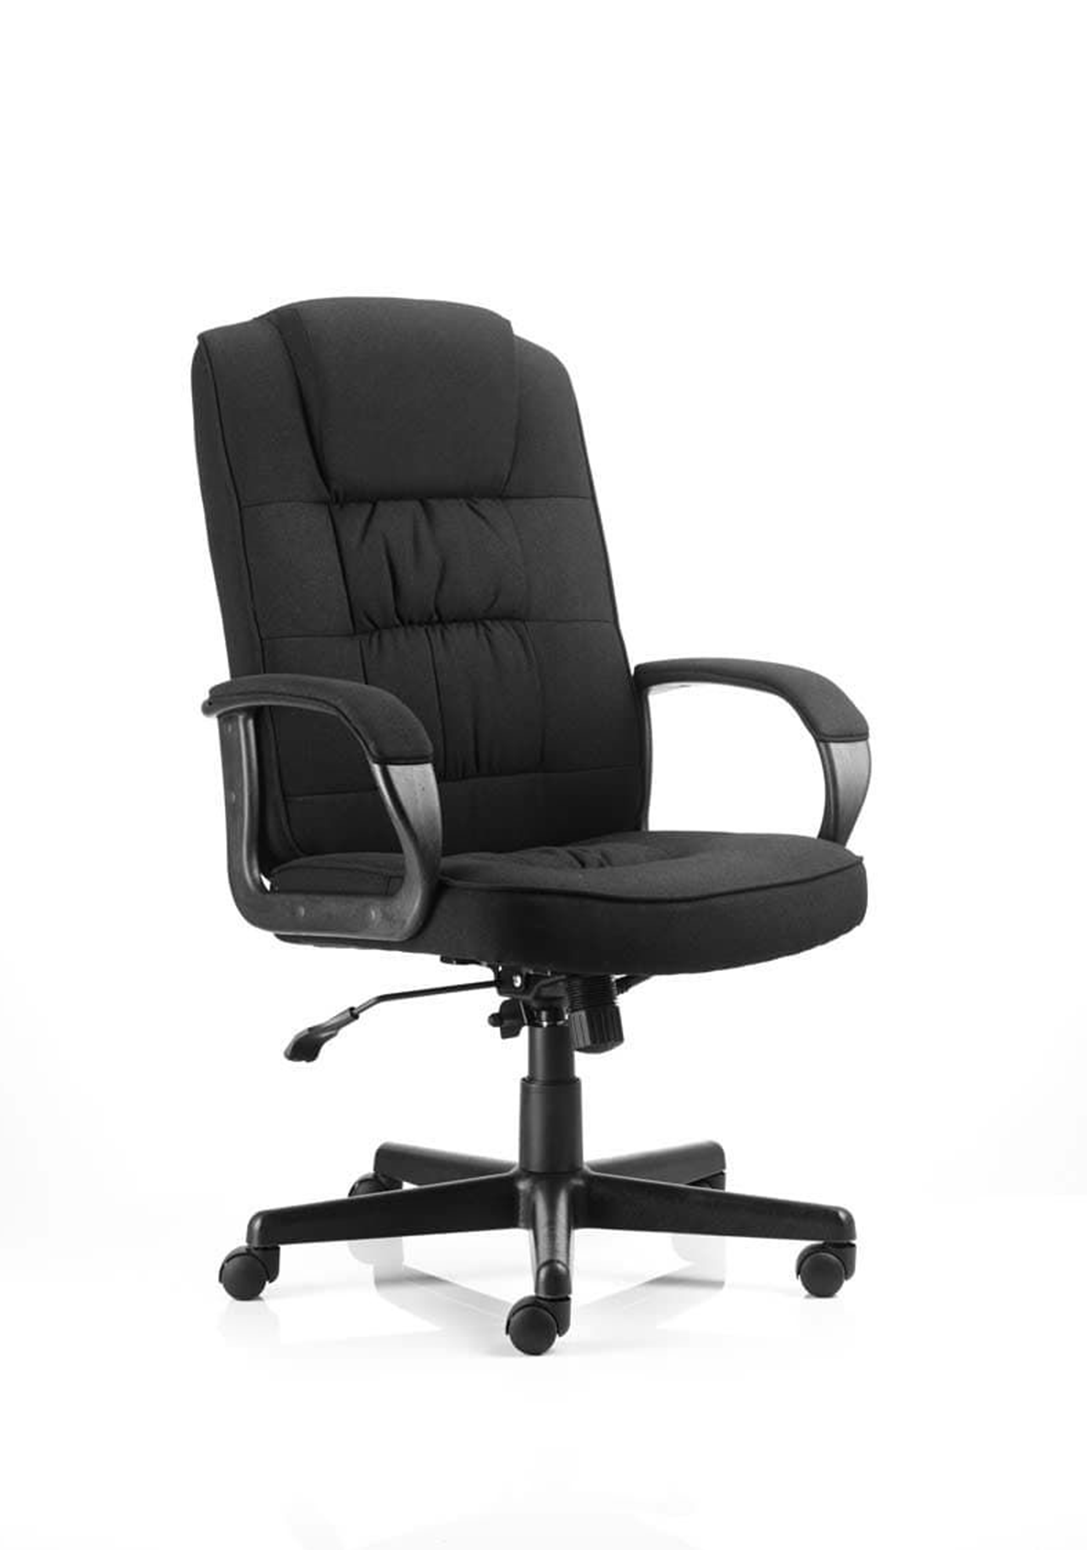 Moore Executive Chair Black Fabric With Arms Image 2